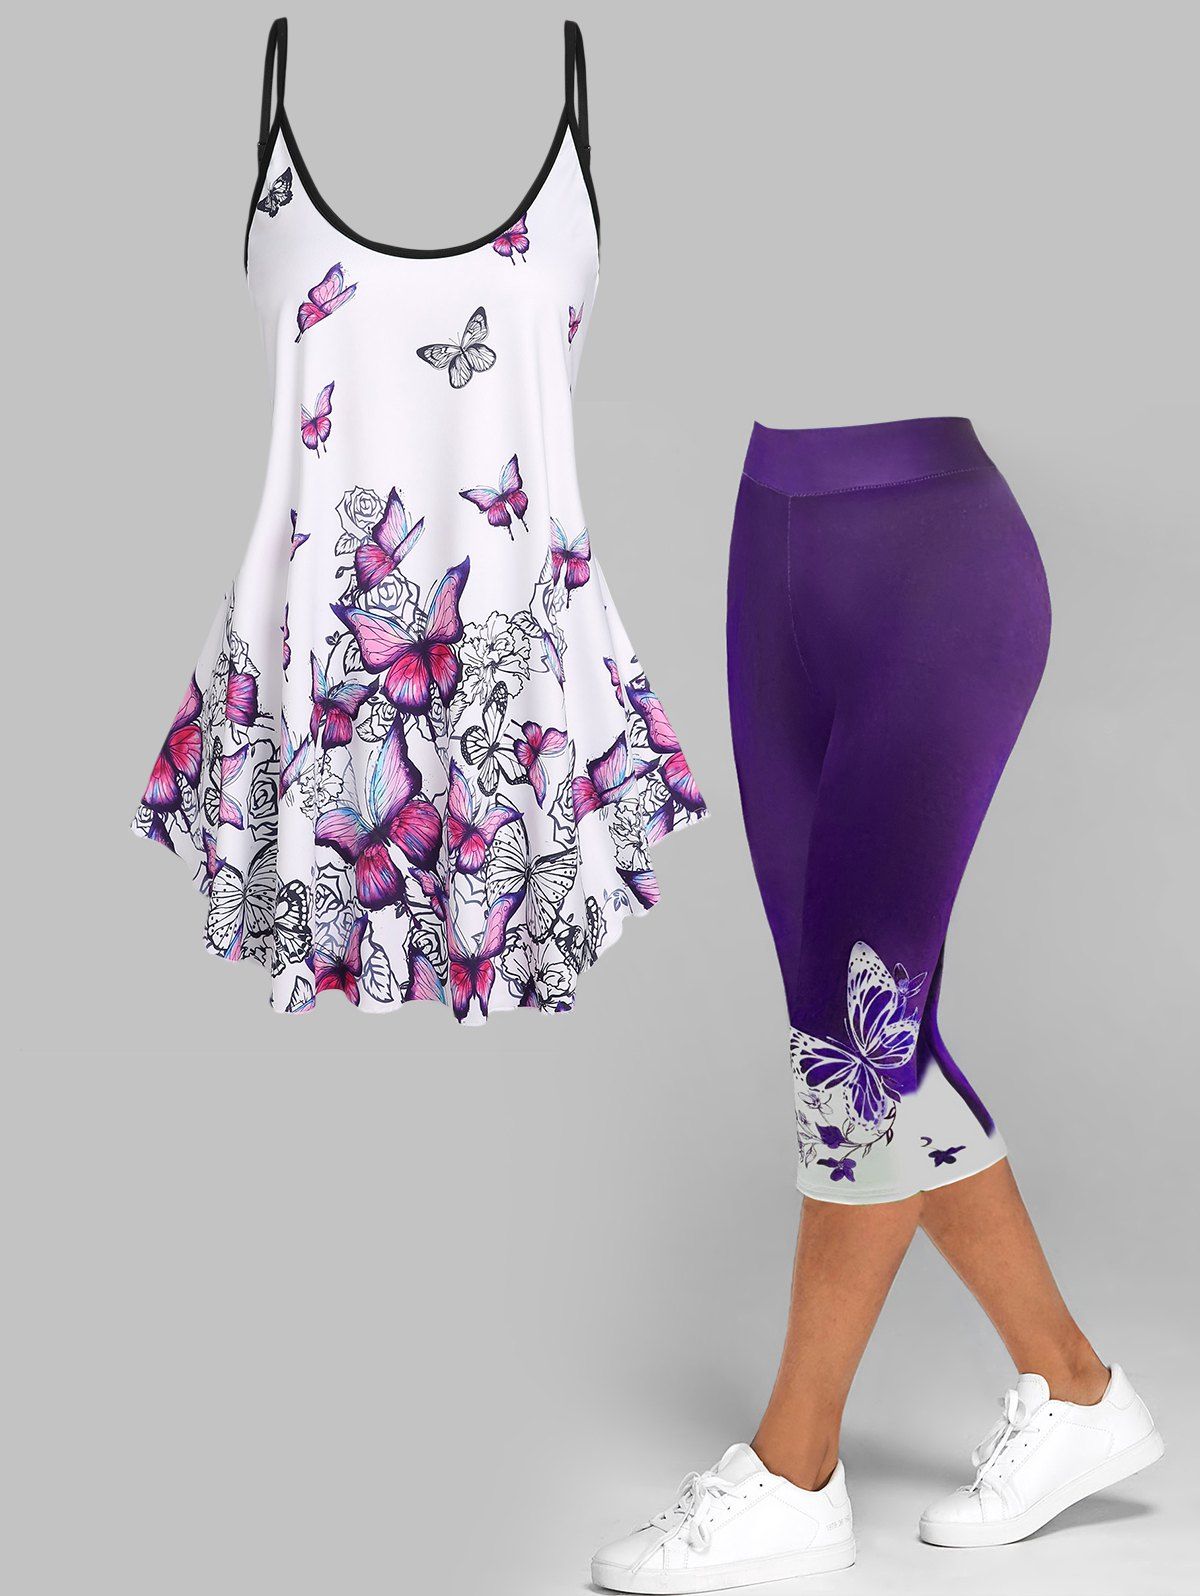 Butterfly Print Tank Top And High Waist Skinny Capri Legging Summer Outfit - PURPLE S